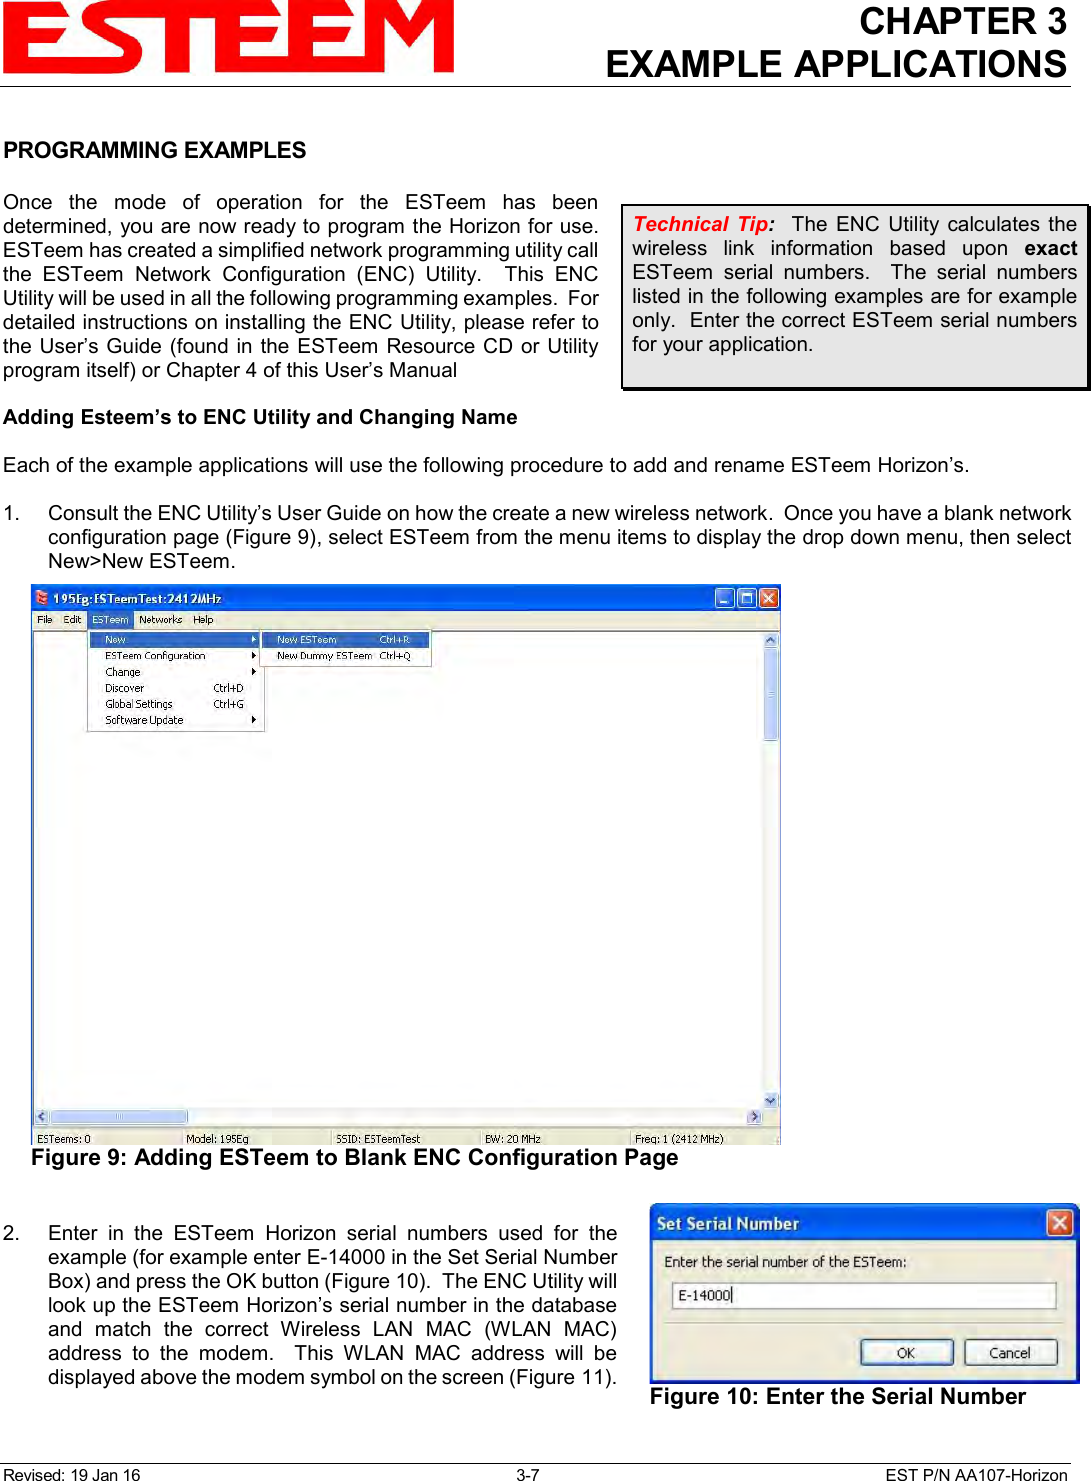 CHAPTER 3 EXAMPLE APPLICATIONS  Revised: 19 Jan 16  3-7  EST P/N AA107-Horizon  PROGRAMMING EXAMPLES  Once  the  mode  of  operation  for  the  ESTeem  has  been determined, you are now ready to program the Horizon for use.  ESTeem has created a simplified network programming utility call the  ESTeem  Network  Configuration  (ENC)  Utility.    This  ENC Utility will be used in all the following programming examples.  For detailed instructions on installing the ENC Utility, please refer to the User’s Guide (found in the ESTeem Resource CD or Utility program itself) or Chapter 4 of this User’s Manual  Adding Esteem’s to ENC Utility and Changing Name  Each of the example applications will use the following procedure to add and rename ESTeem Horizon’s.   1.    Consult the ENC Utility’s User Guide on how the create a new wireless network.  Once you have a blank network configuration page (Figure 9), select ESTeem from the menu items to display the drop down menu, then select New&gt;New ESTeem.   2.    Enter  in  the  ESTeem  Horizon  serial  numbers  used  for  the example (for example enter E-14000 in the Set Serial Number Box) and press the OK button (Figure 10).  The ENC Utility will look up the ESTeem Horizon’s serial number in the database and  match  the  correct  Wireless  LAN  MAC  (WLAN  MAC) address  to  the  modem.    This  WLAN  MAC  address  will  be displayed above the modem symbol on the screen (Figure 11).  Technical  Tip:    The  ENC  Utility  calculates  the wireless  link  information  based  upon  exact ESTeem  serial  numbers.    The  serial  numbers listed in the following examples are for example only.  Enter the correct ESTeem serial numbers for your application.   Figure 9: Adding ESTeem to Blank ENC Configuration Page  Figure 10: Enter the Serial Number 